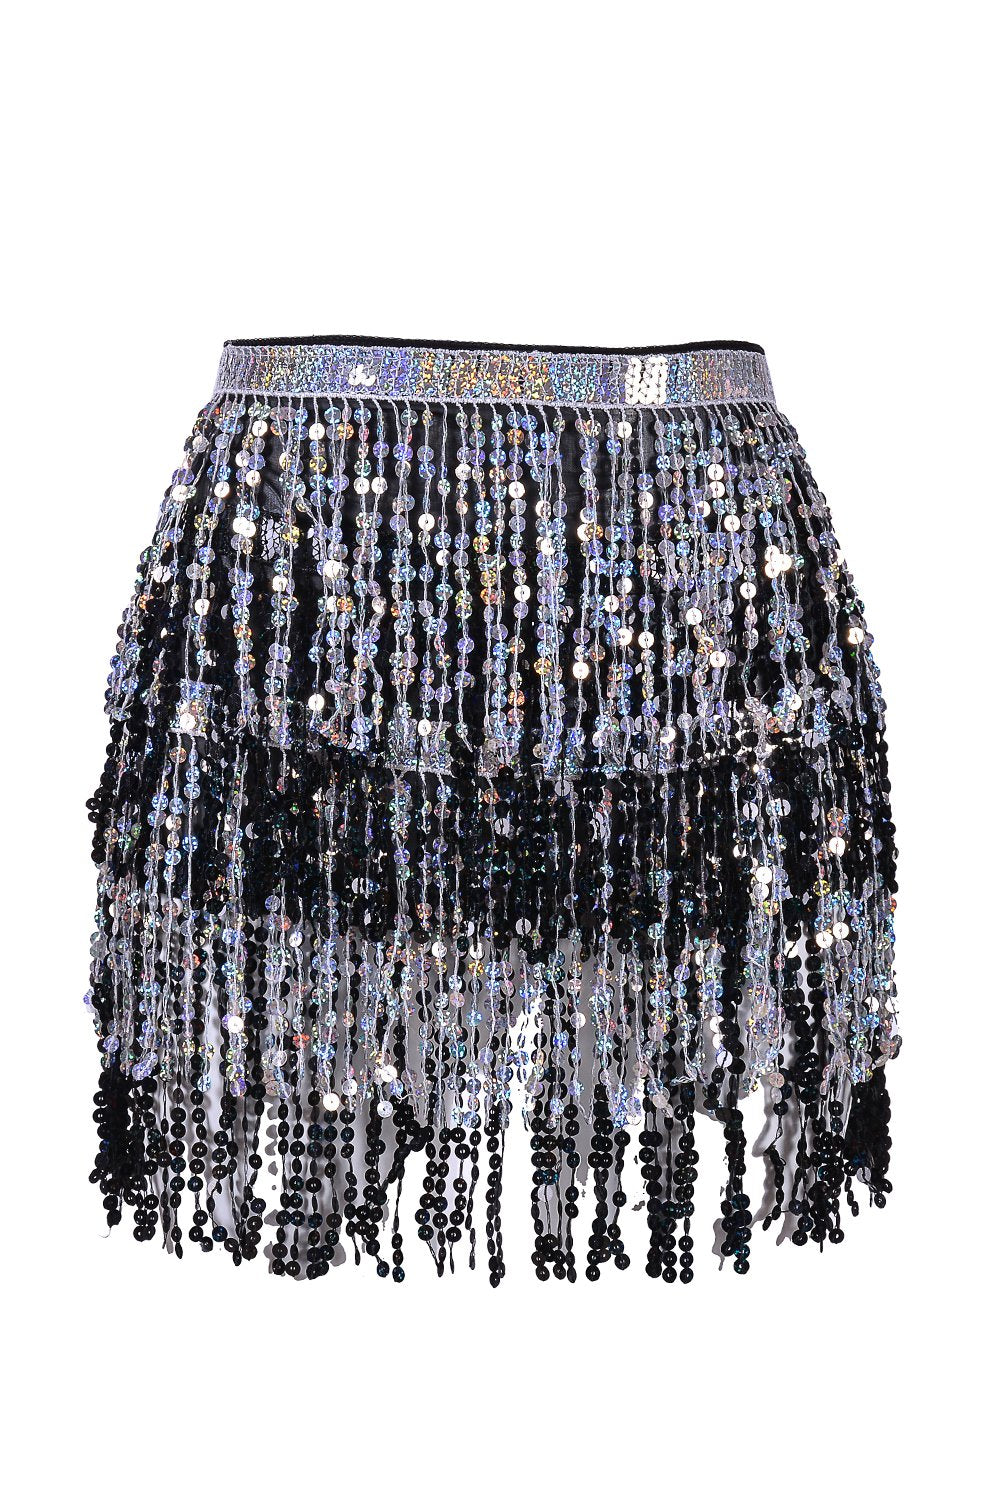 Holographic Sequin Skirt - Silver/Black